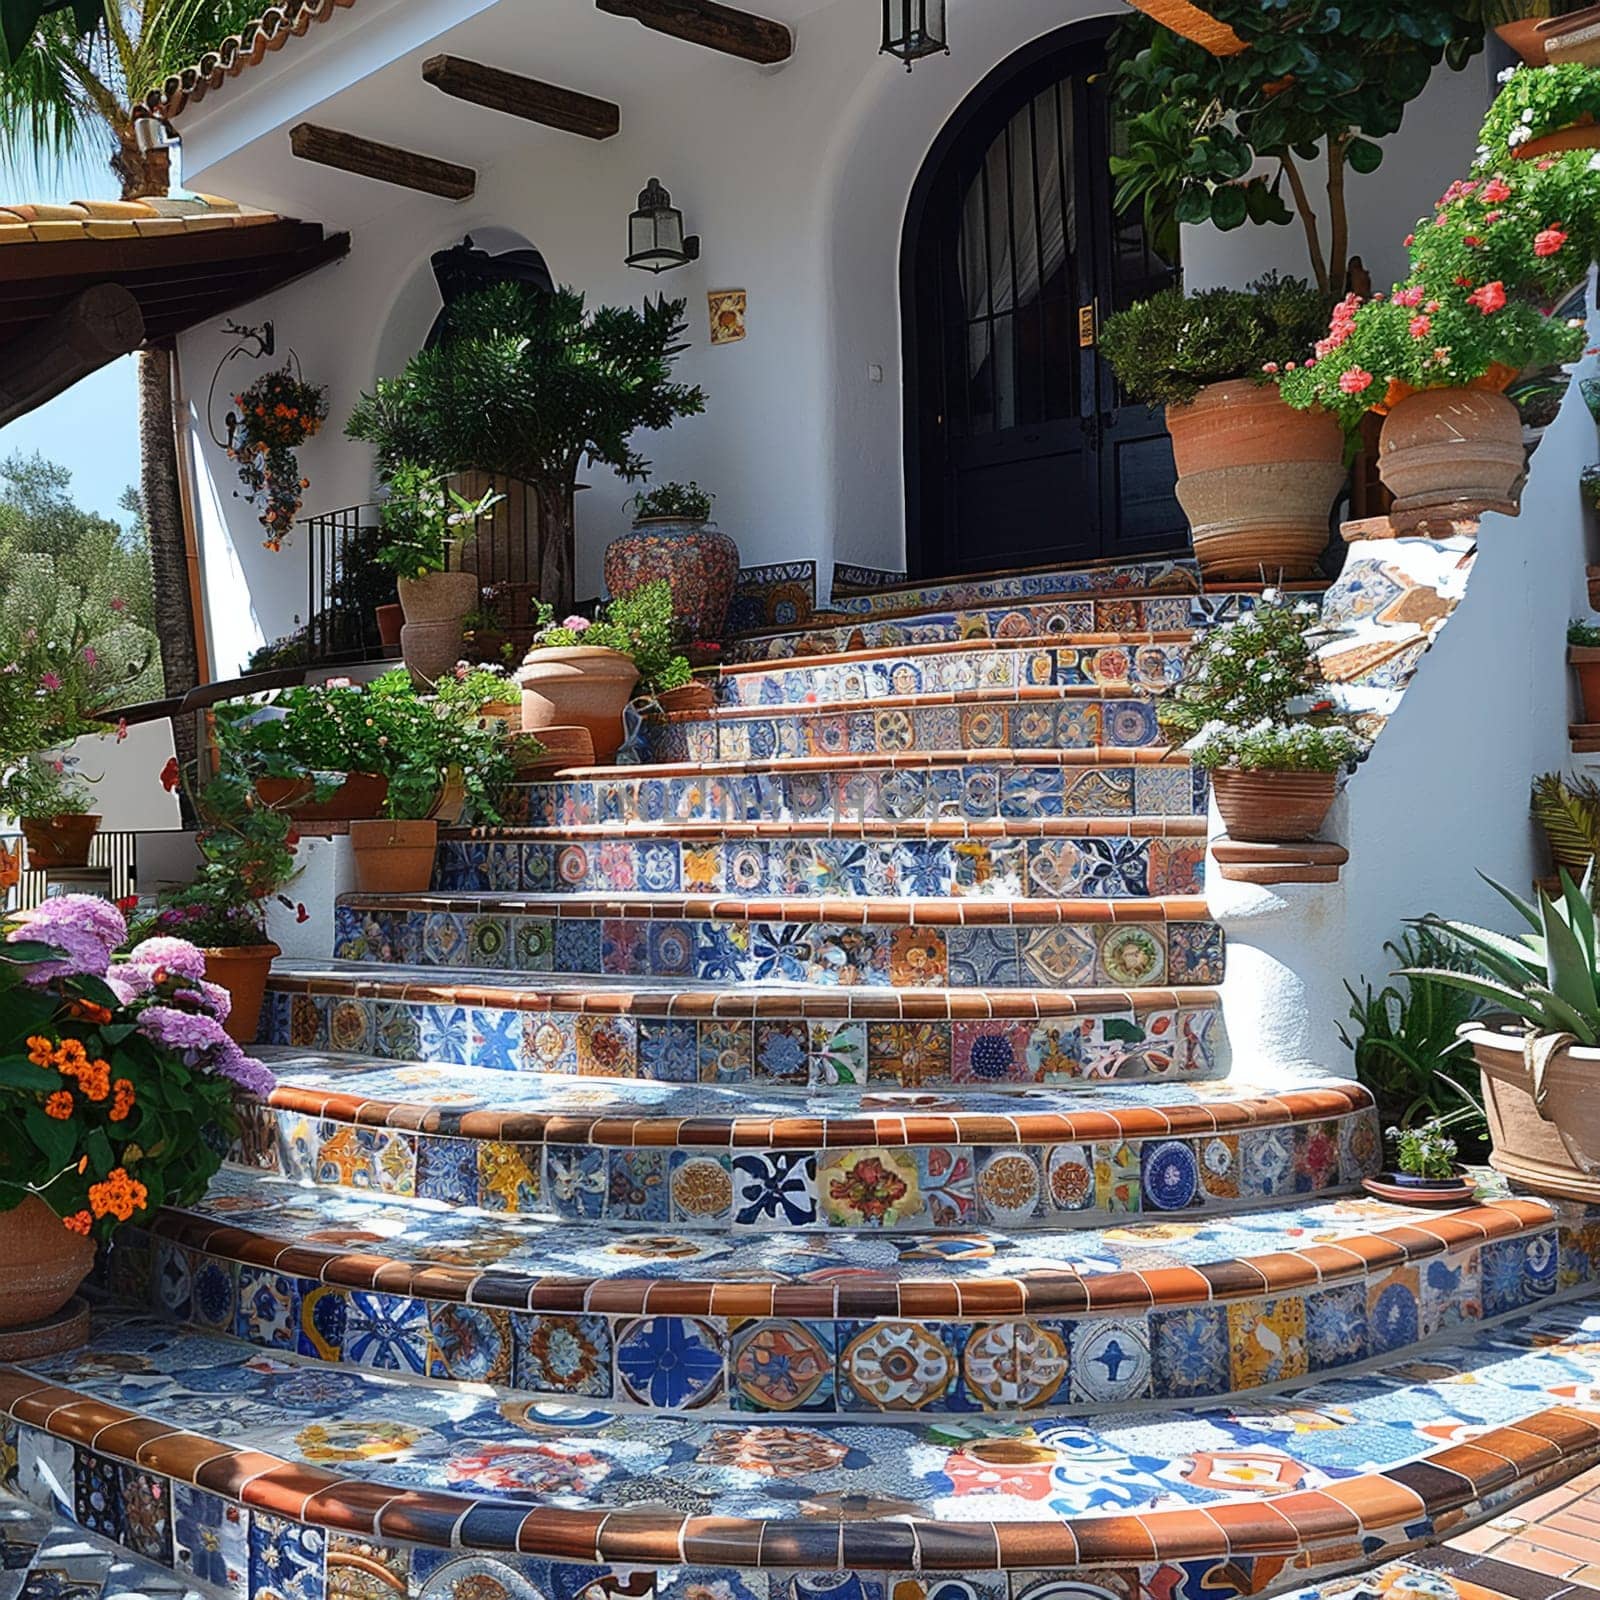 Tiled Mosaic Podium in a Mediterranean Courtyard, The colorful tiles blur with the sunny ambiance, perfect for vibrant and exotic product lines.